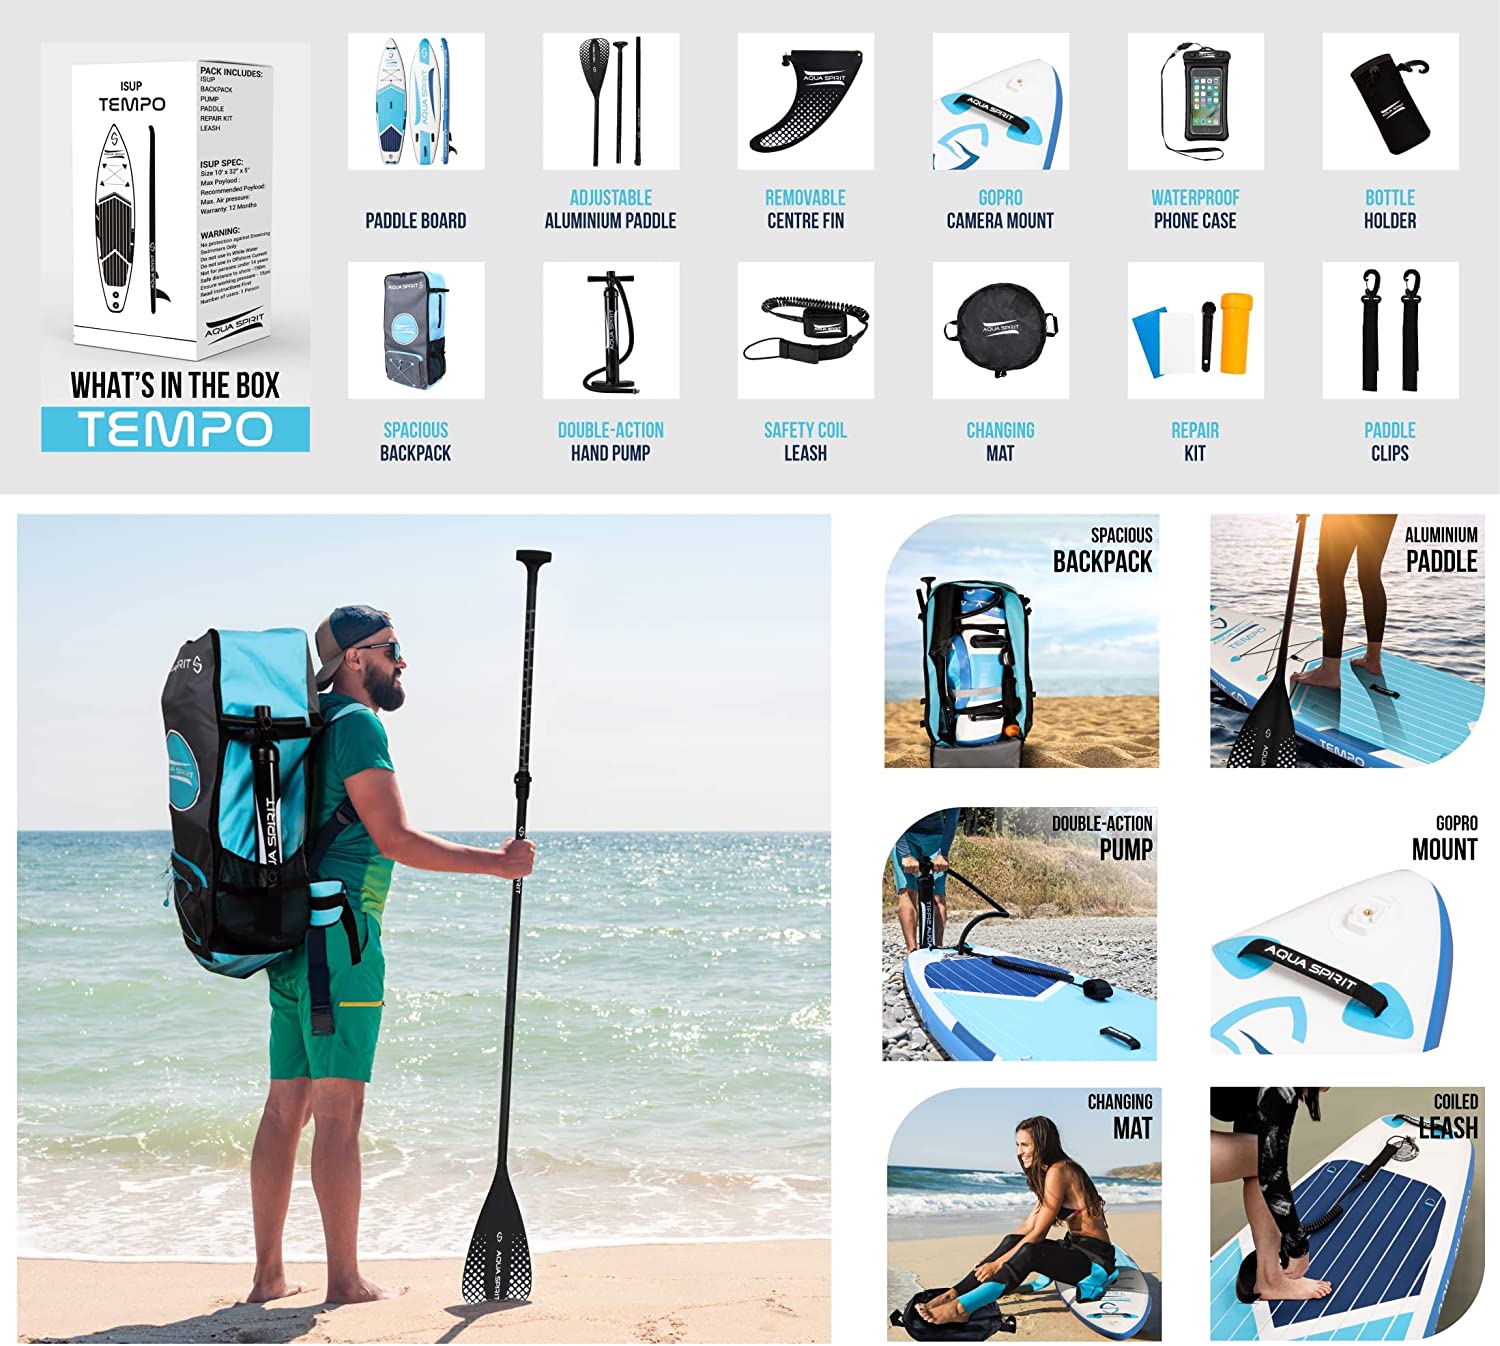 Aqua Spirit Tempo 10'/10'6 iSUP Inflatable Stand Up Paddle Board For Adult Beginners/intermediate With Backpack, Leash, Paddle, Changing Mat & Waterproof Phone Case, All-Inclusive Package, 3-Years Of Complete Brand Warranty - Aqua Spirit iSUPs